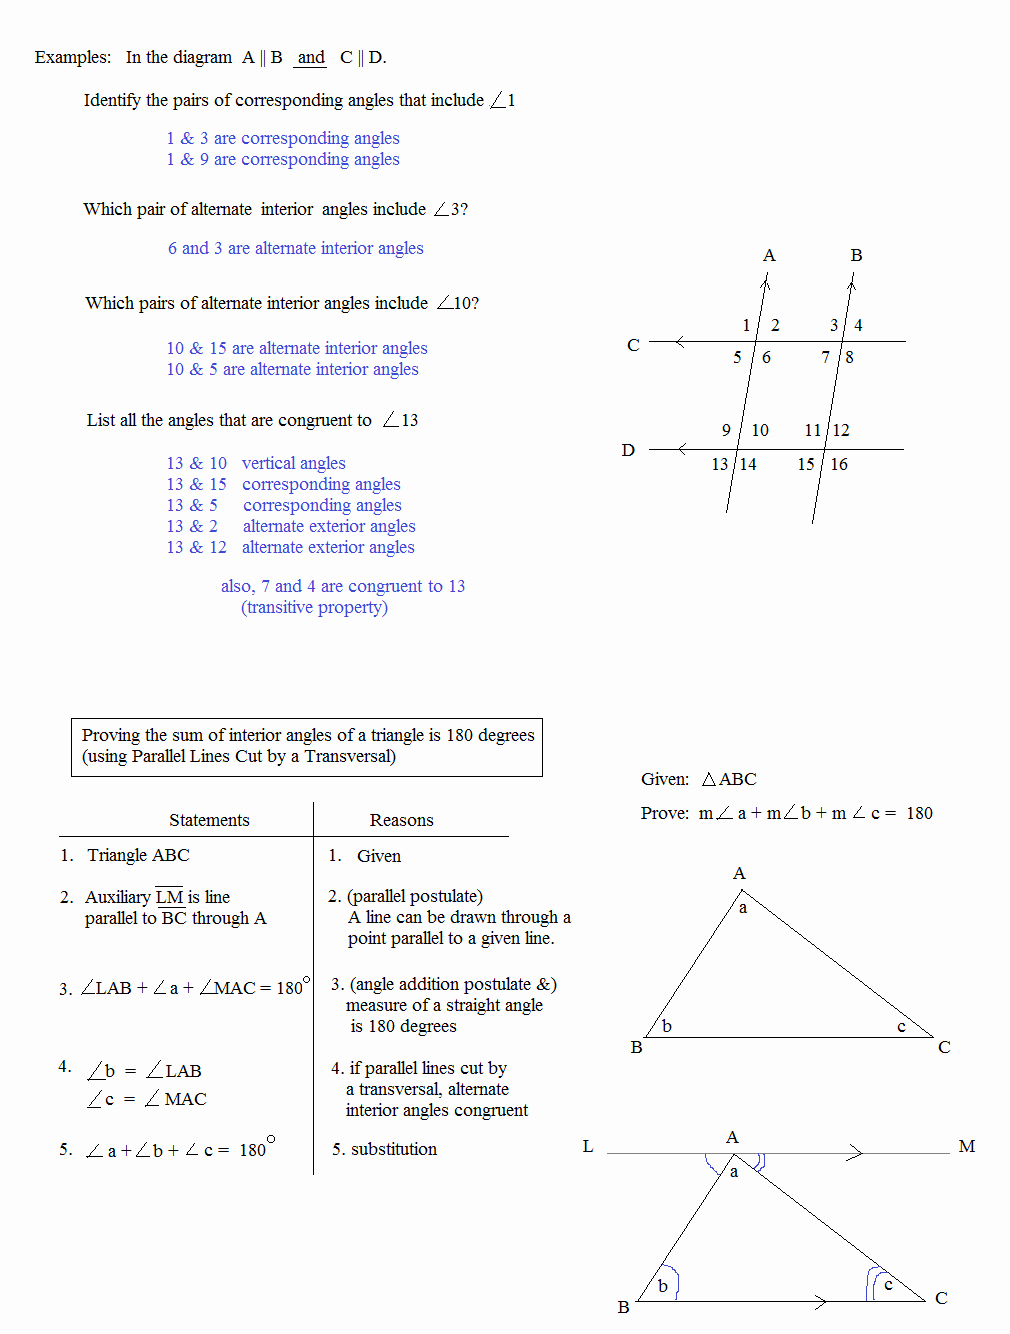 Parallel Lines and Transversals Worksheet Luxury Math Plane Parallel Lines Cut by Transversals